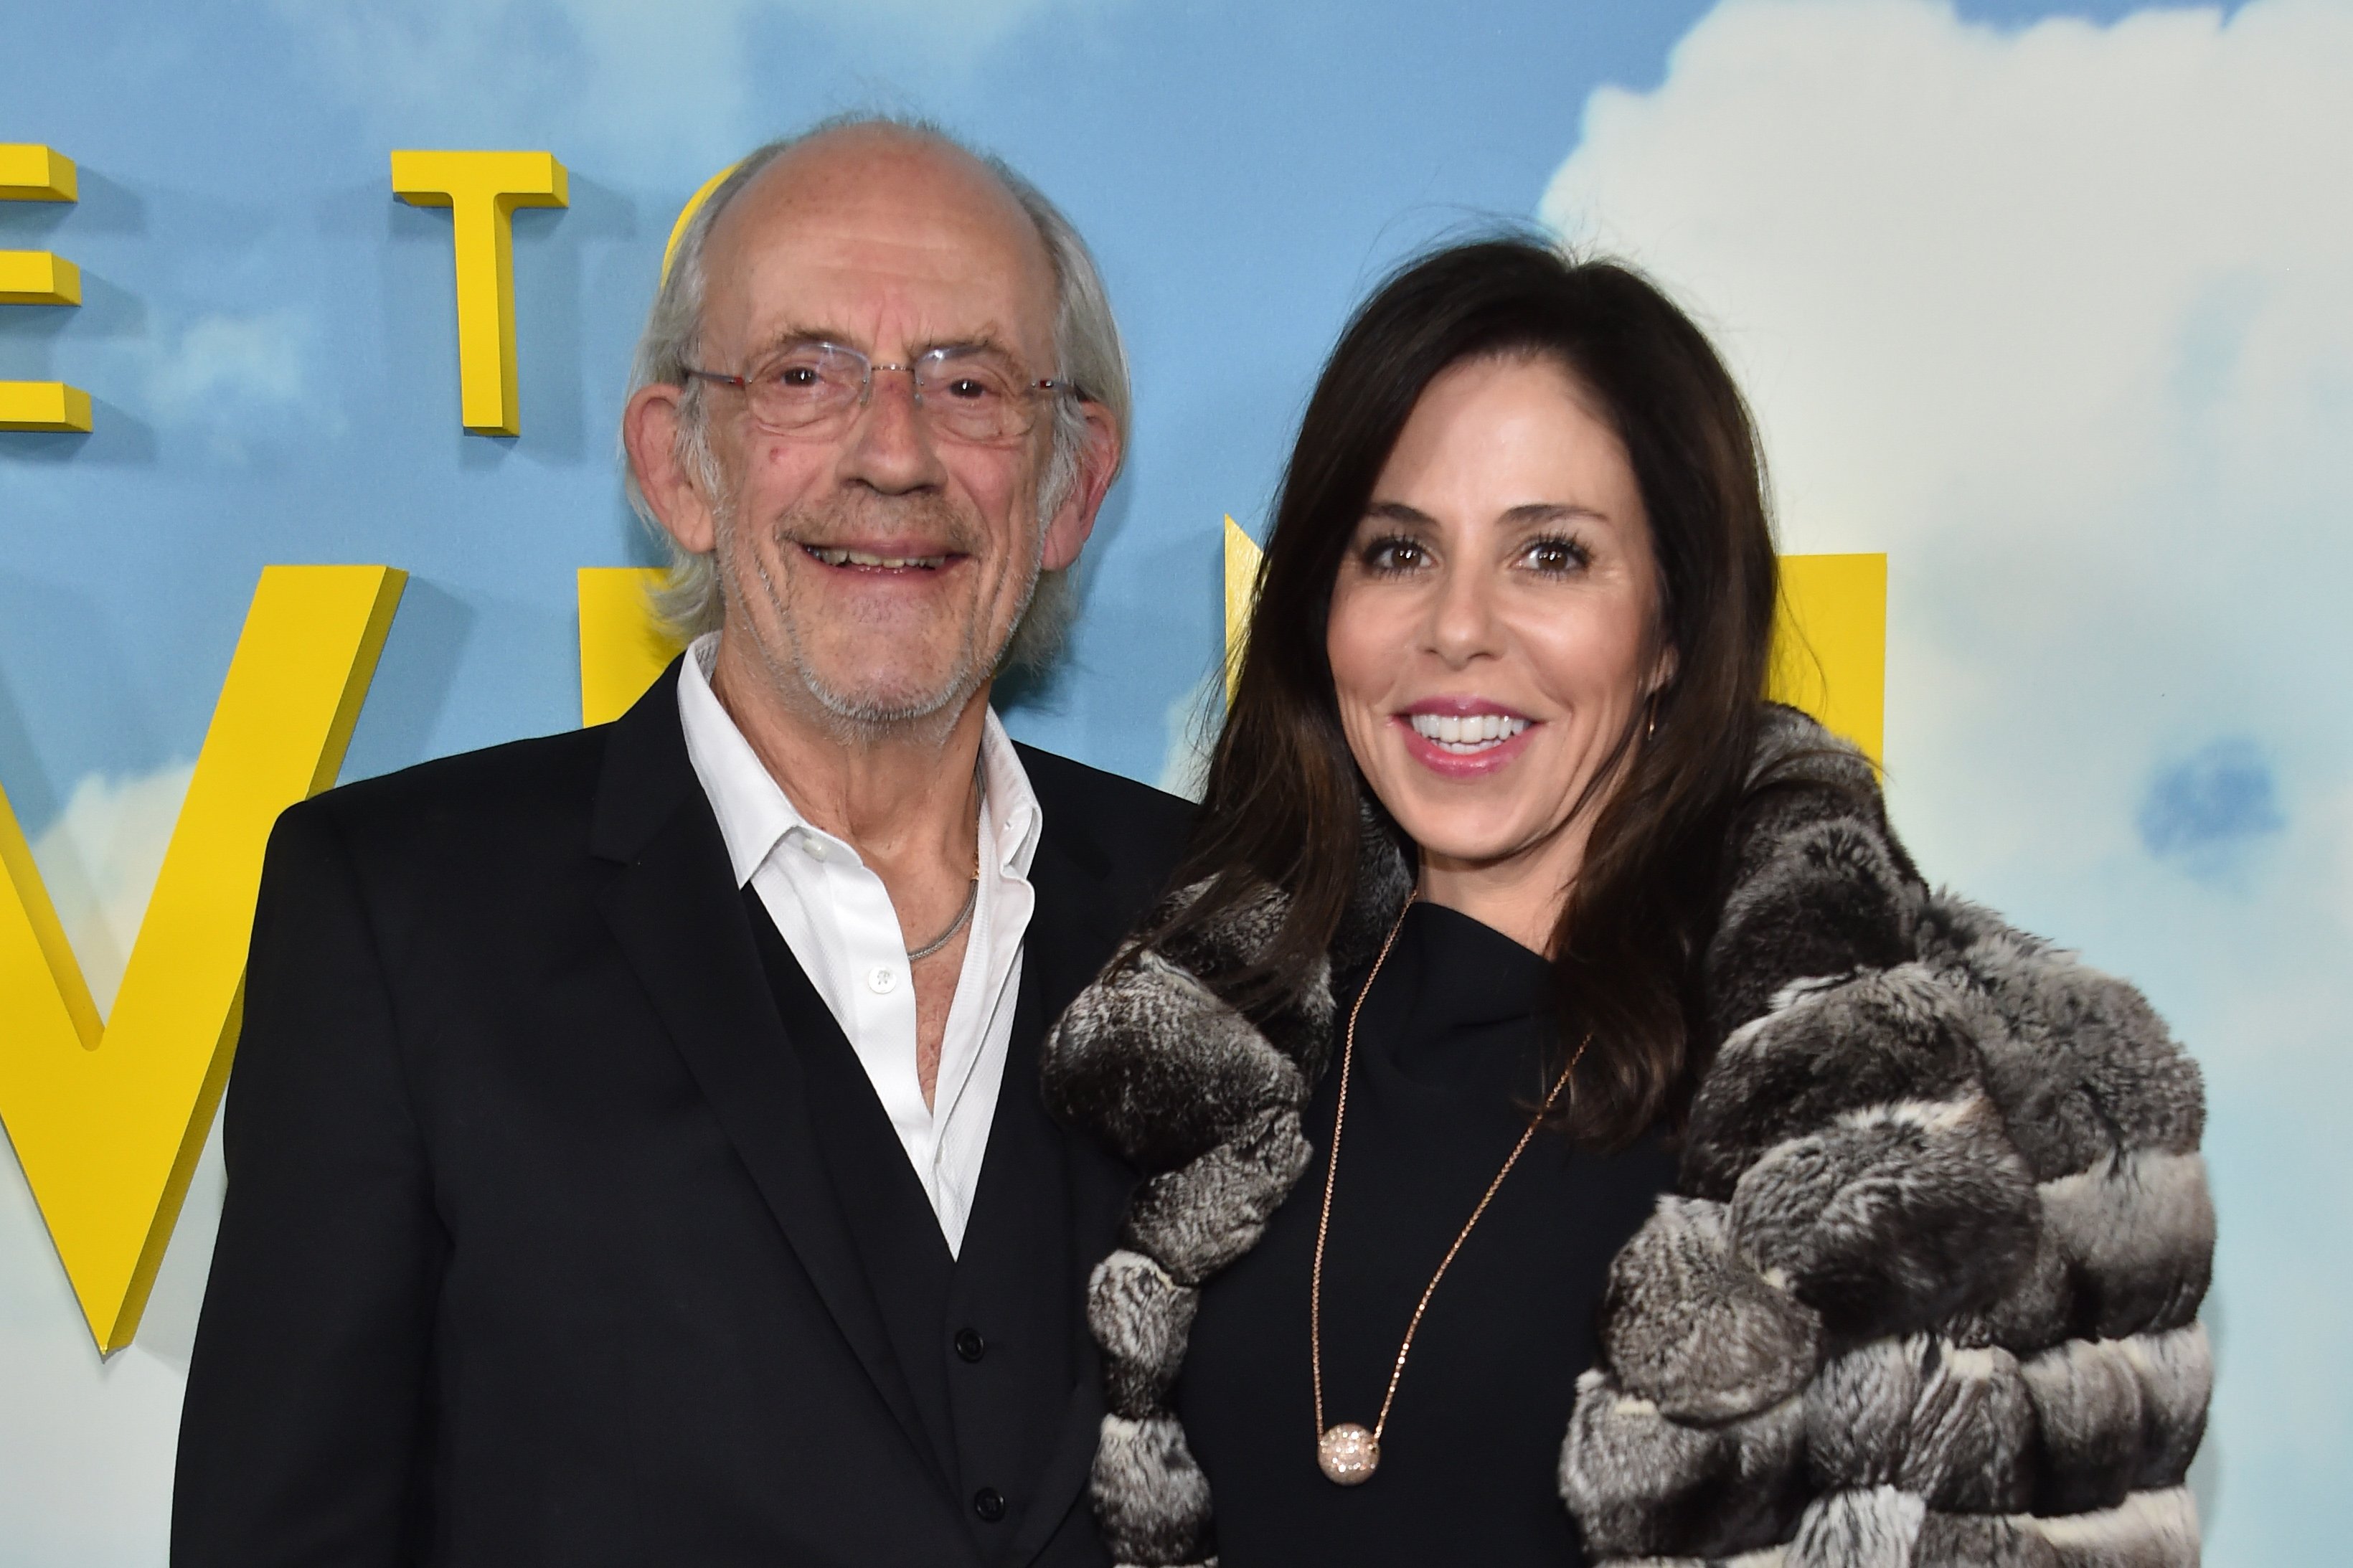 Christopher Lloyd and Jane Walker Wood at the premiere of "Welcome to Marwen" in Hollywood on December 10, 2018. | Source: Getty Images